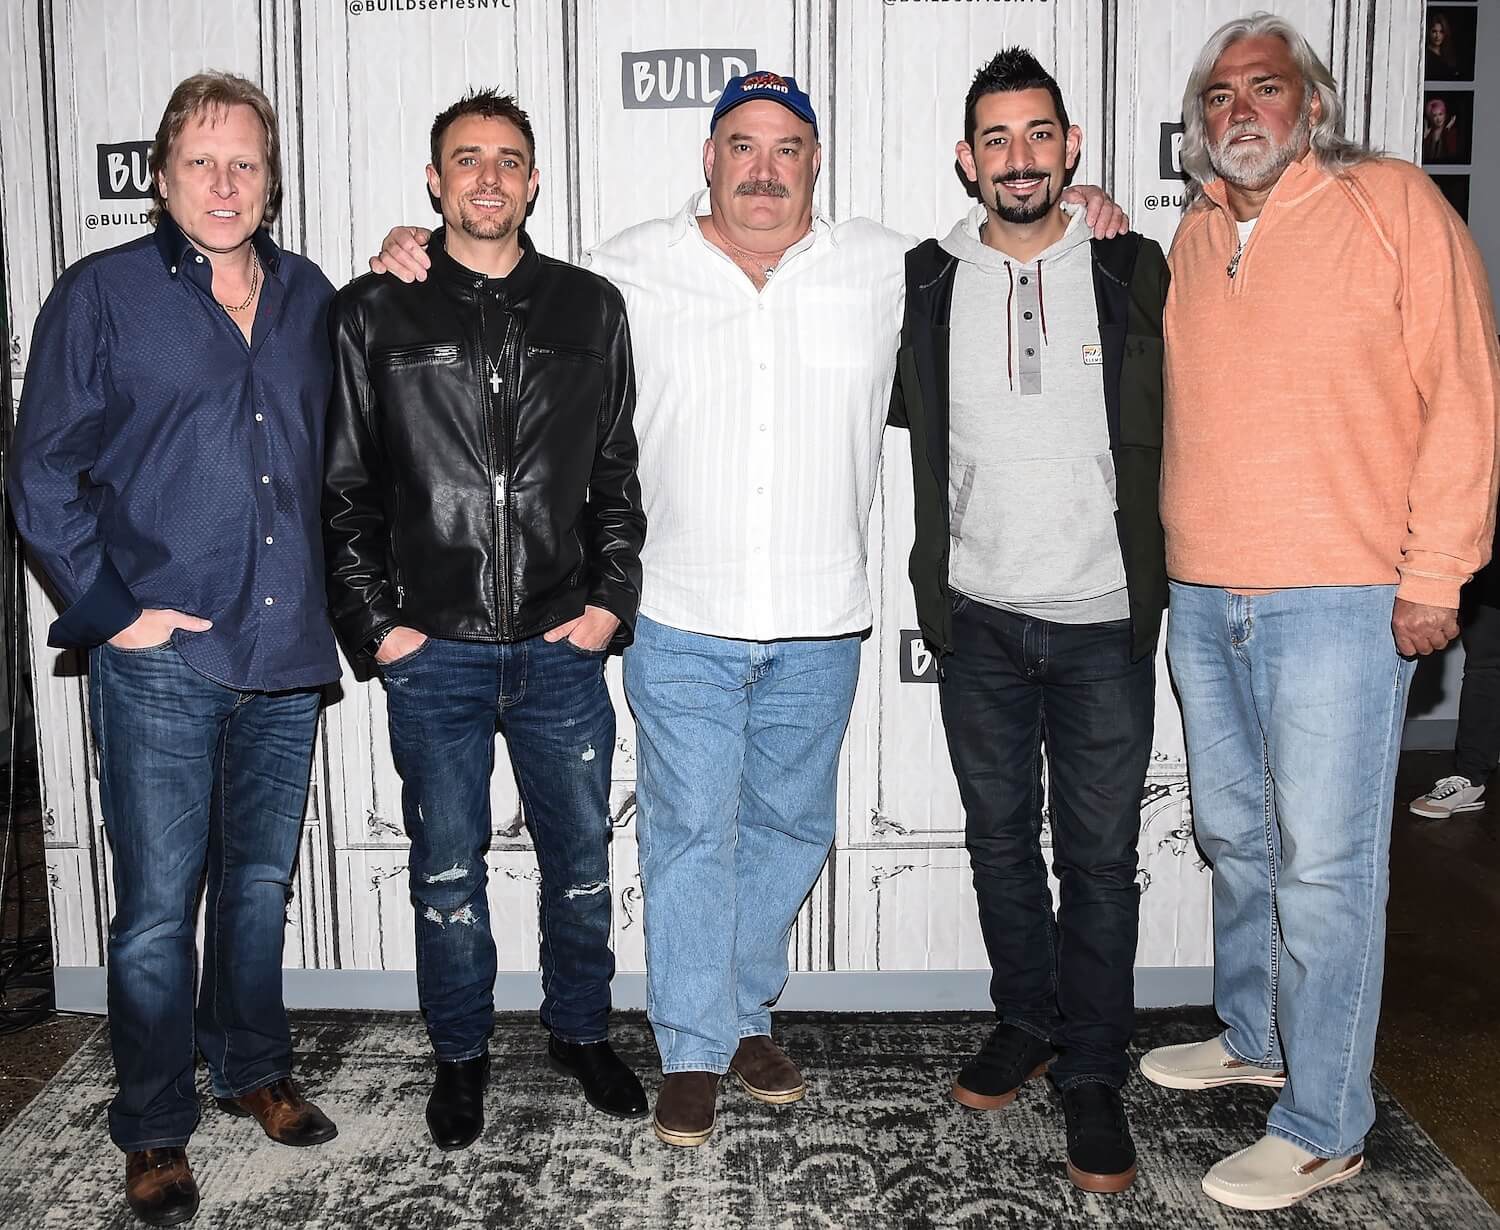 'Deadliest Catch' cast members, including Jake Anderson, standing together with their arms around each other and smiling